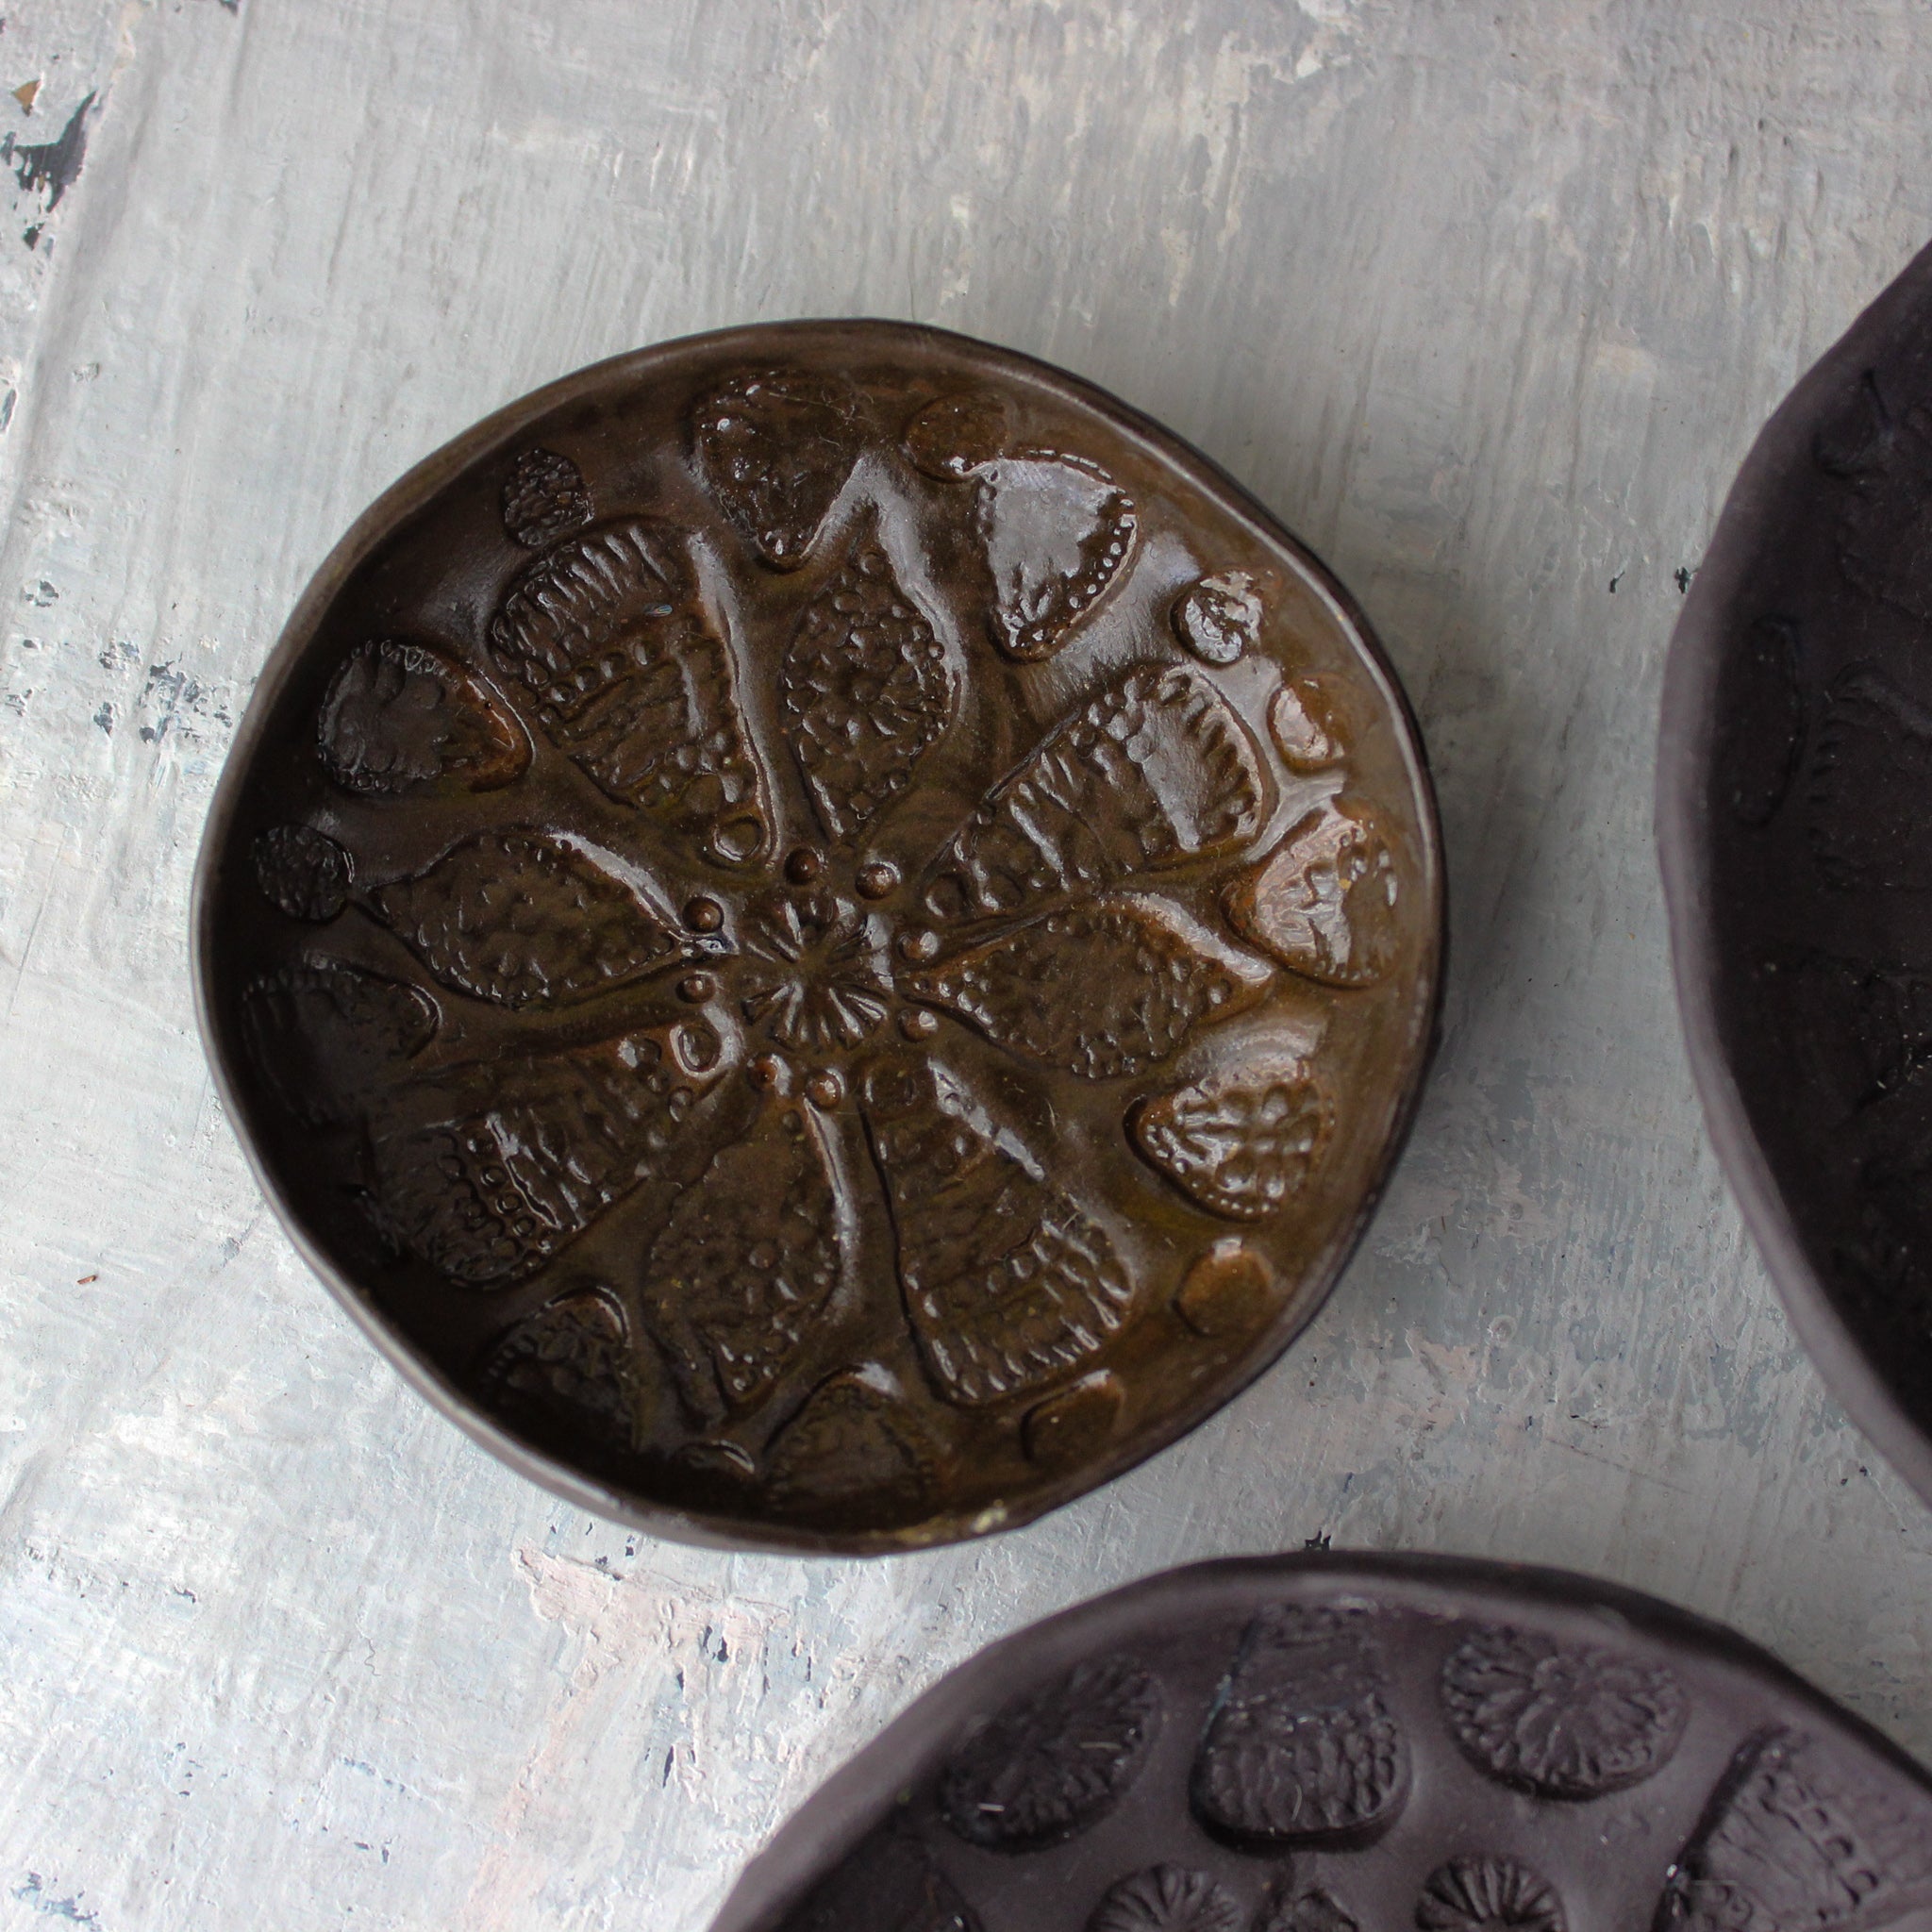 Black Ceramic Lace Dishes - Tribe Castlemaine